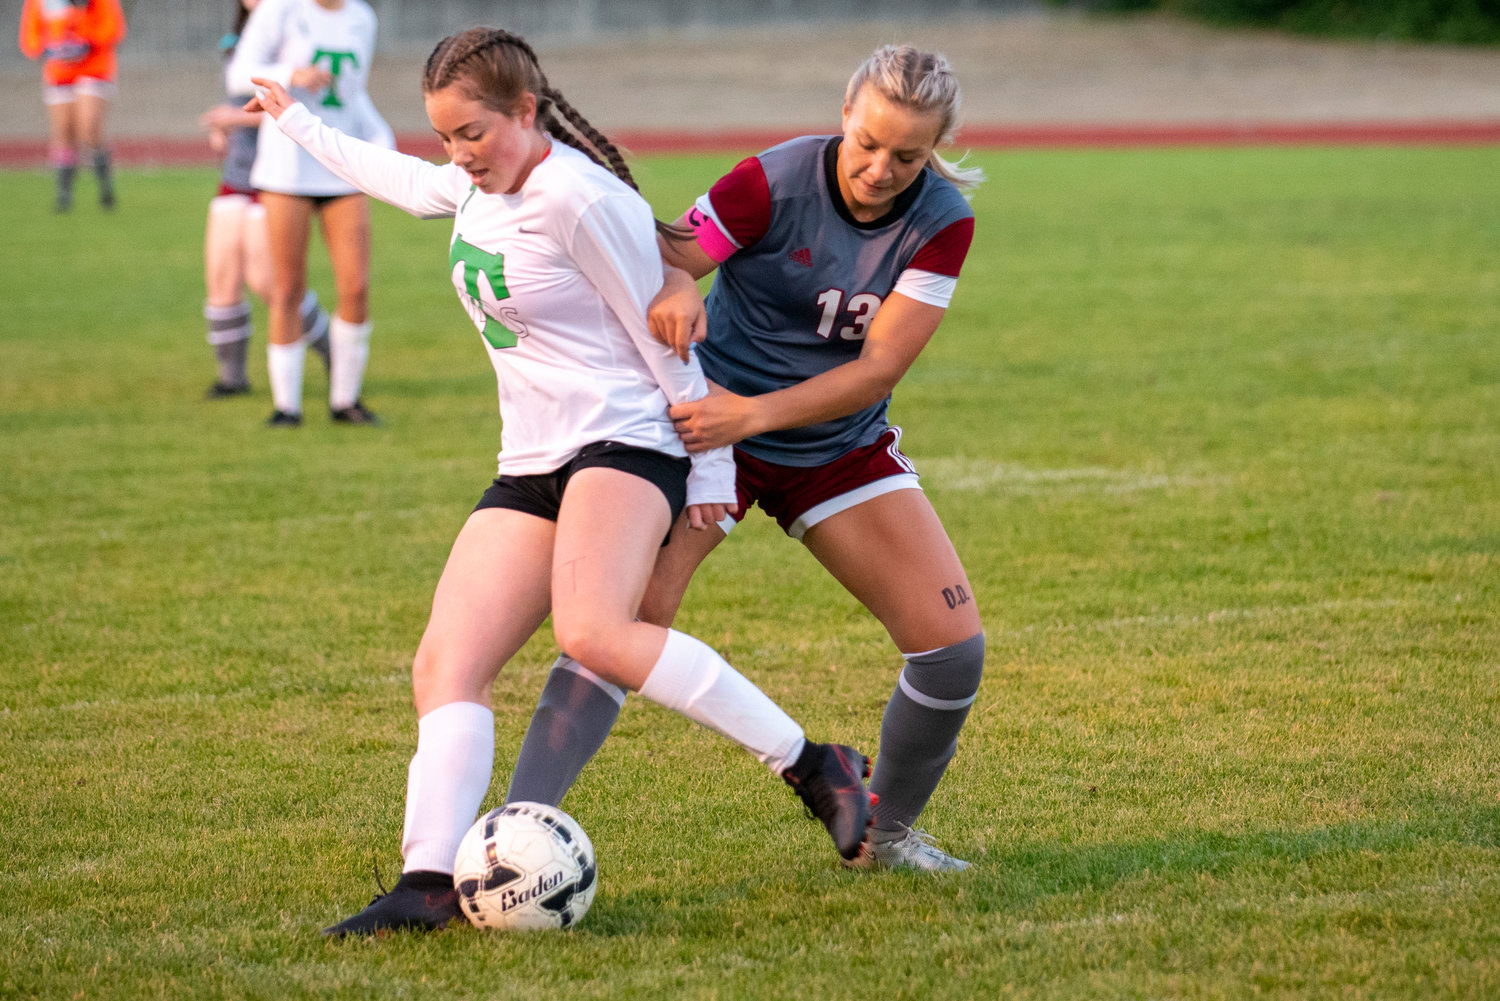 W.F. West's Cameron Sheets (13) battles for the ball against Tumwater's Olivia Kee on Tuesday.